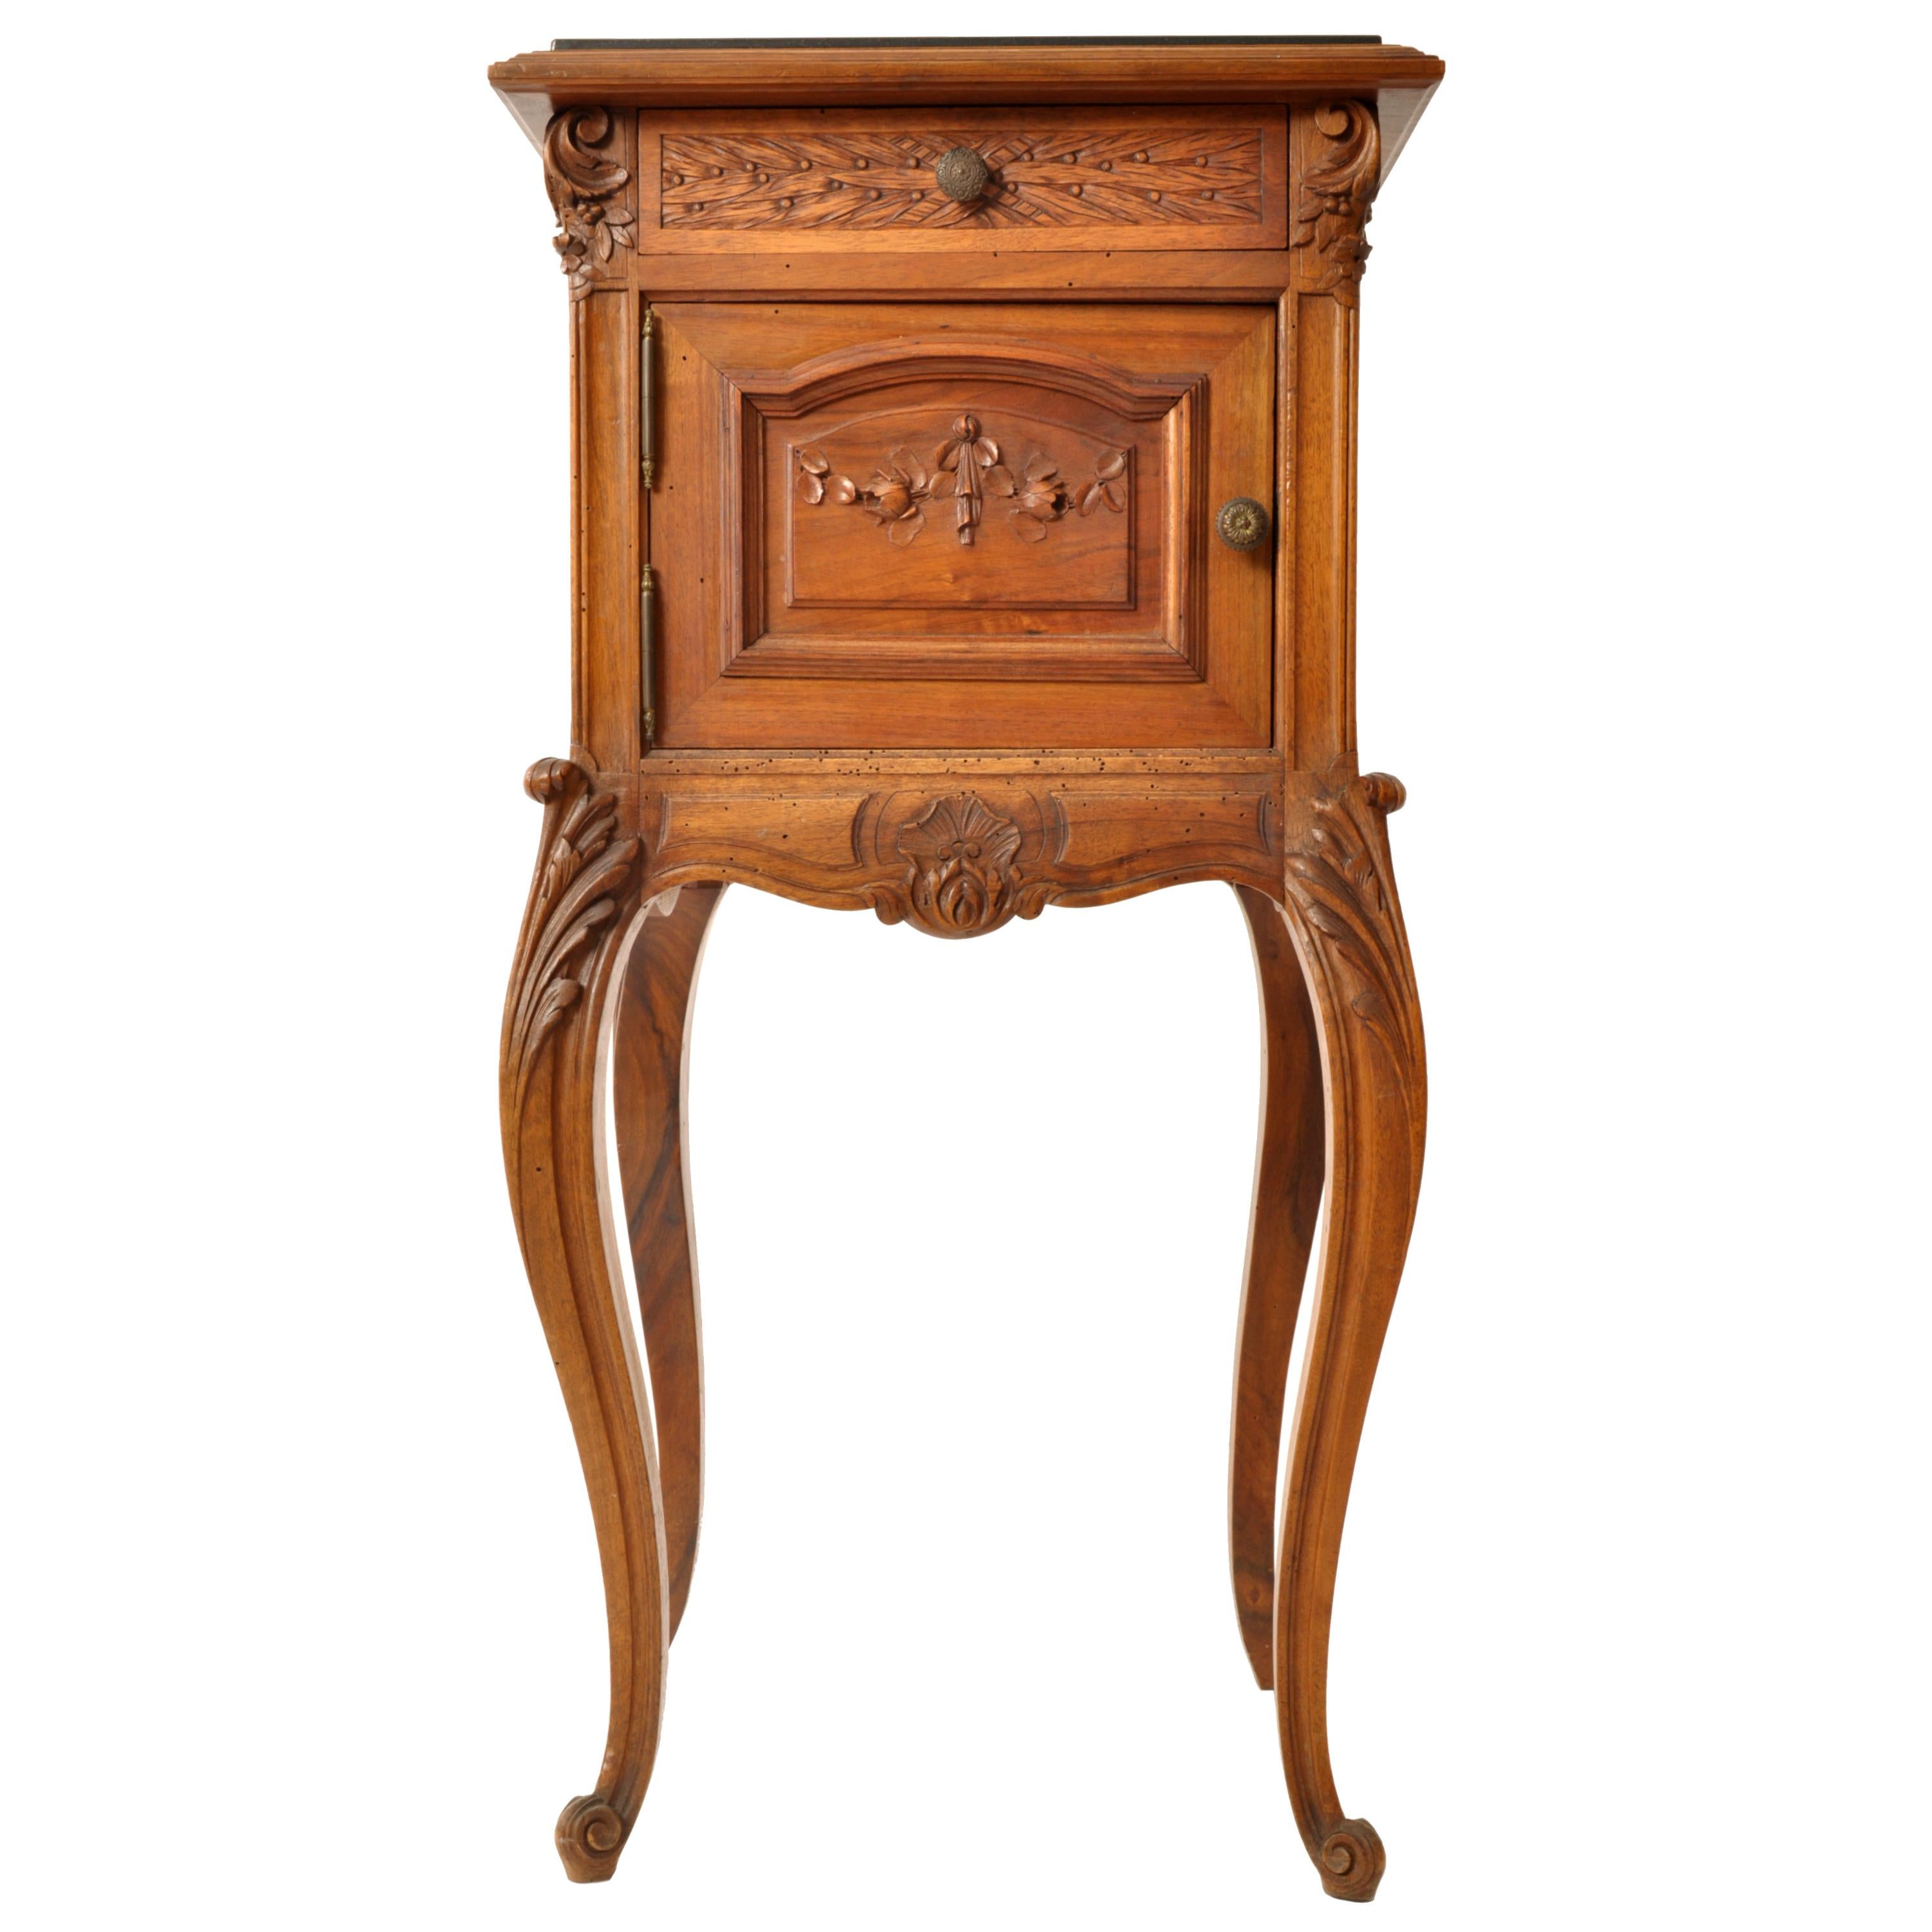 Antique French Provincial Louis XVI Carved Walnut & Marble Nightstand Table 1880 For Sale